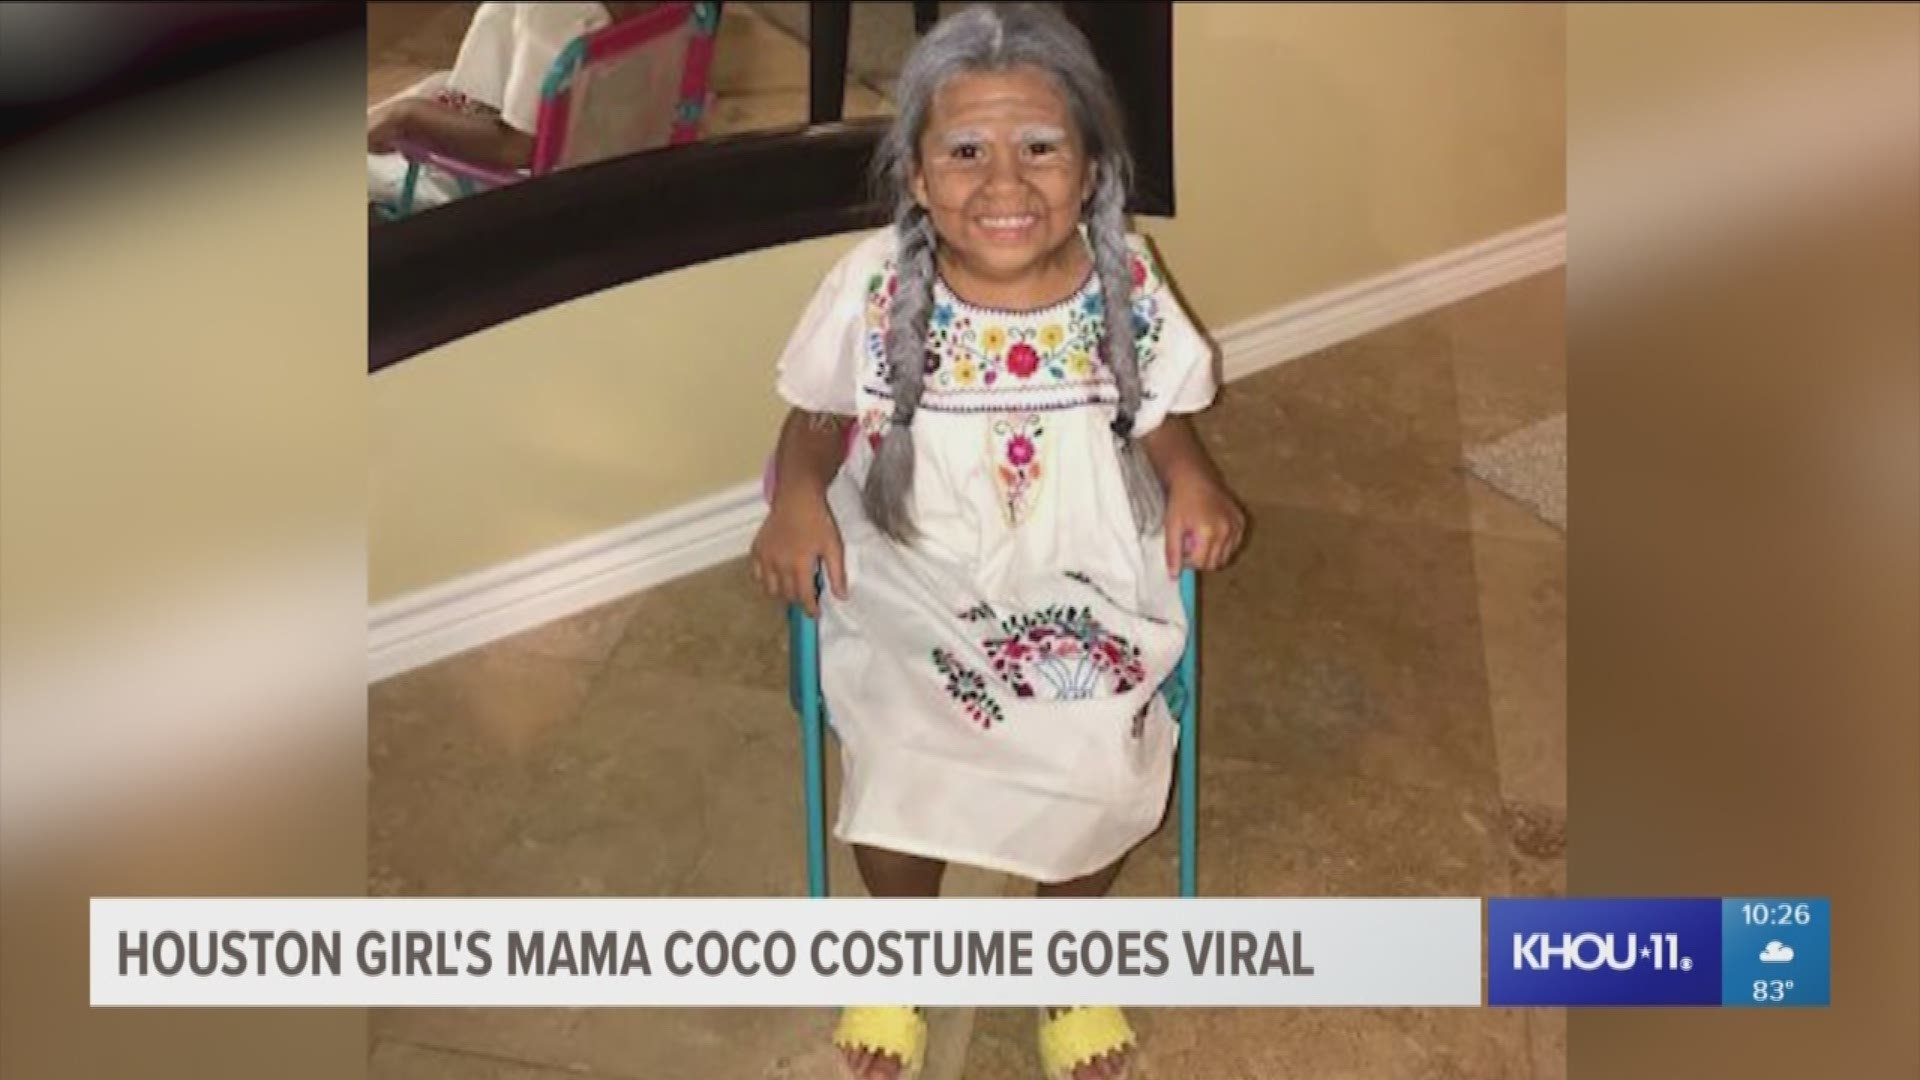 Houston mother dresses her daughter as Mama Coco